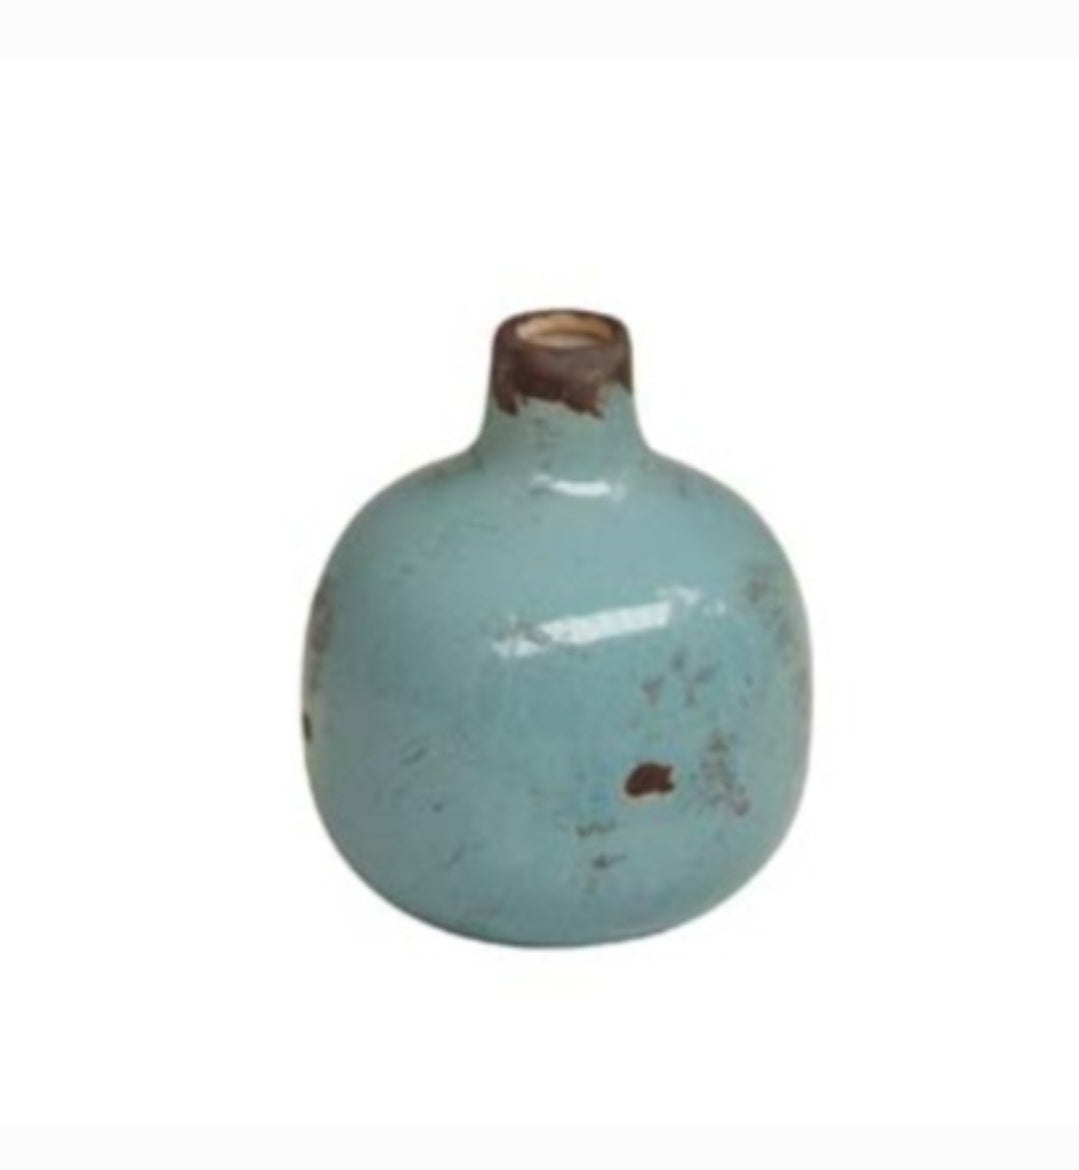 Pale blue small bud vase with a distressed glaze